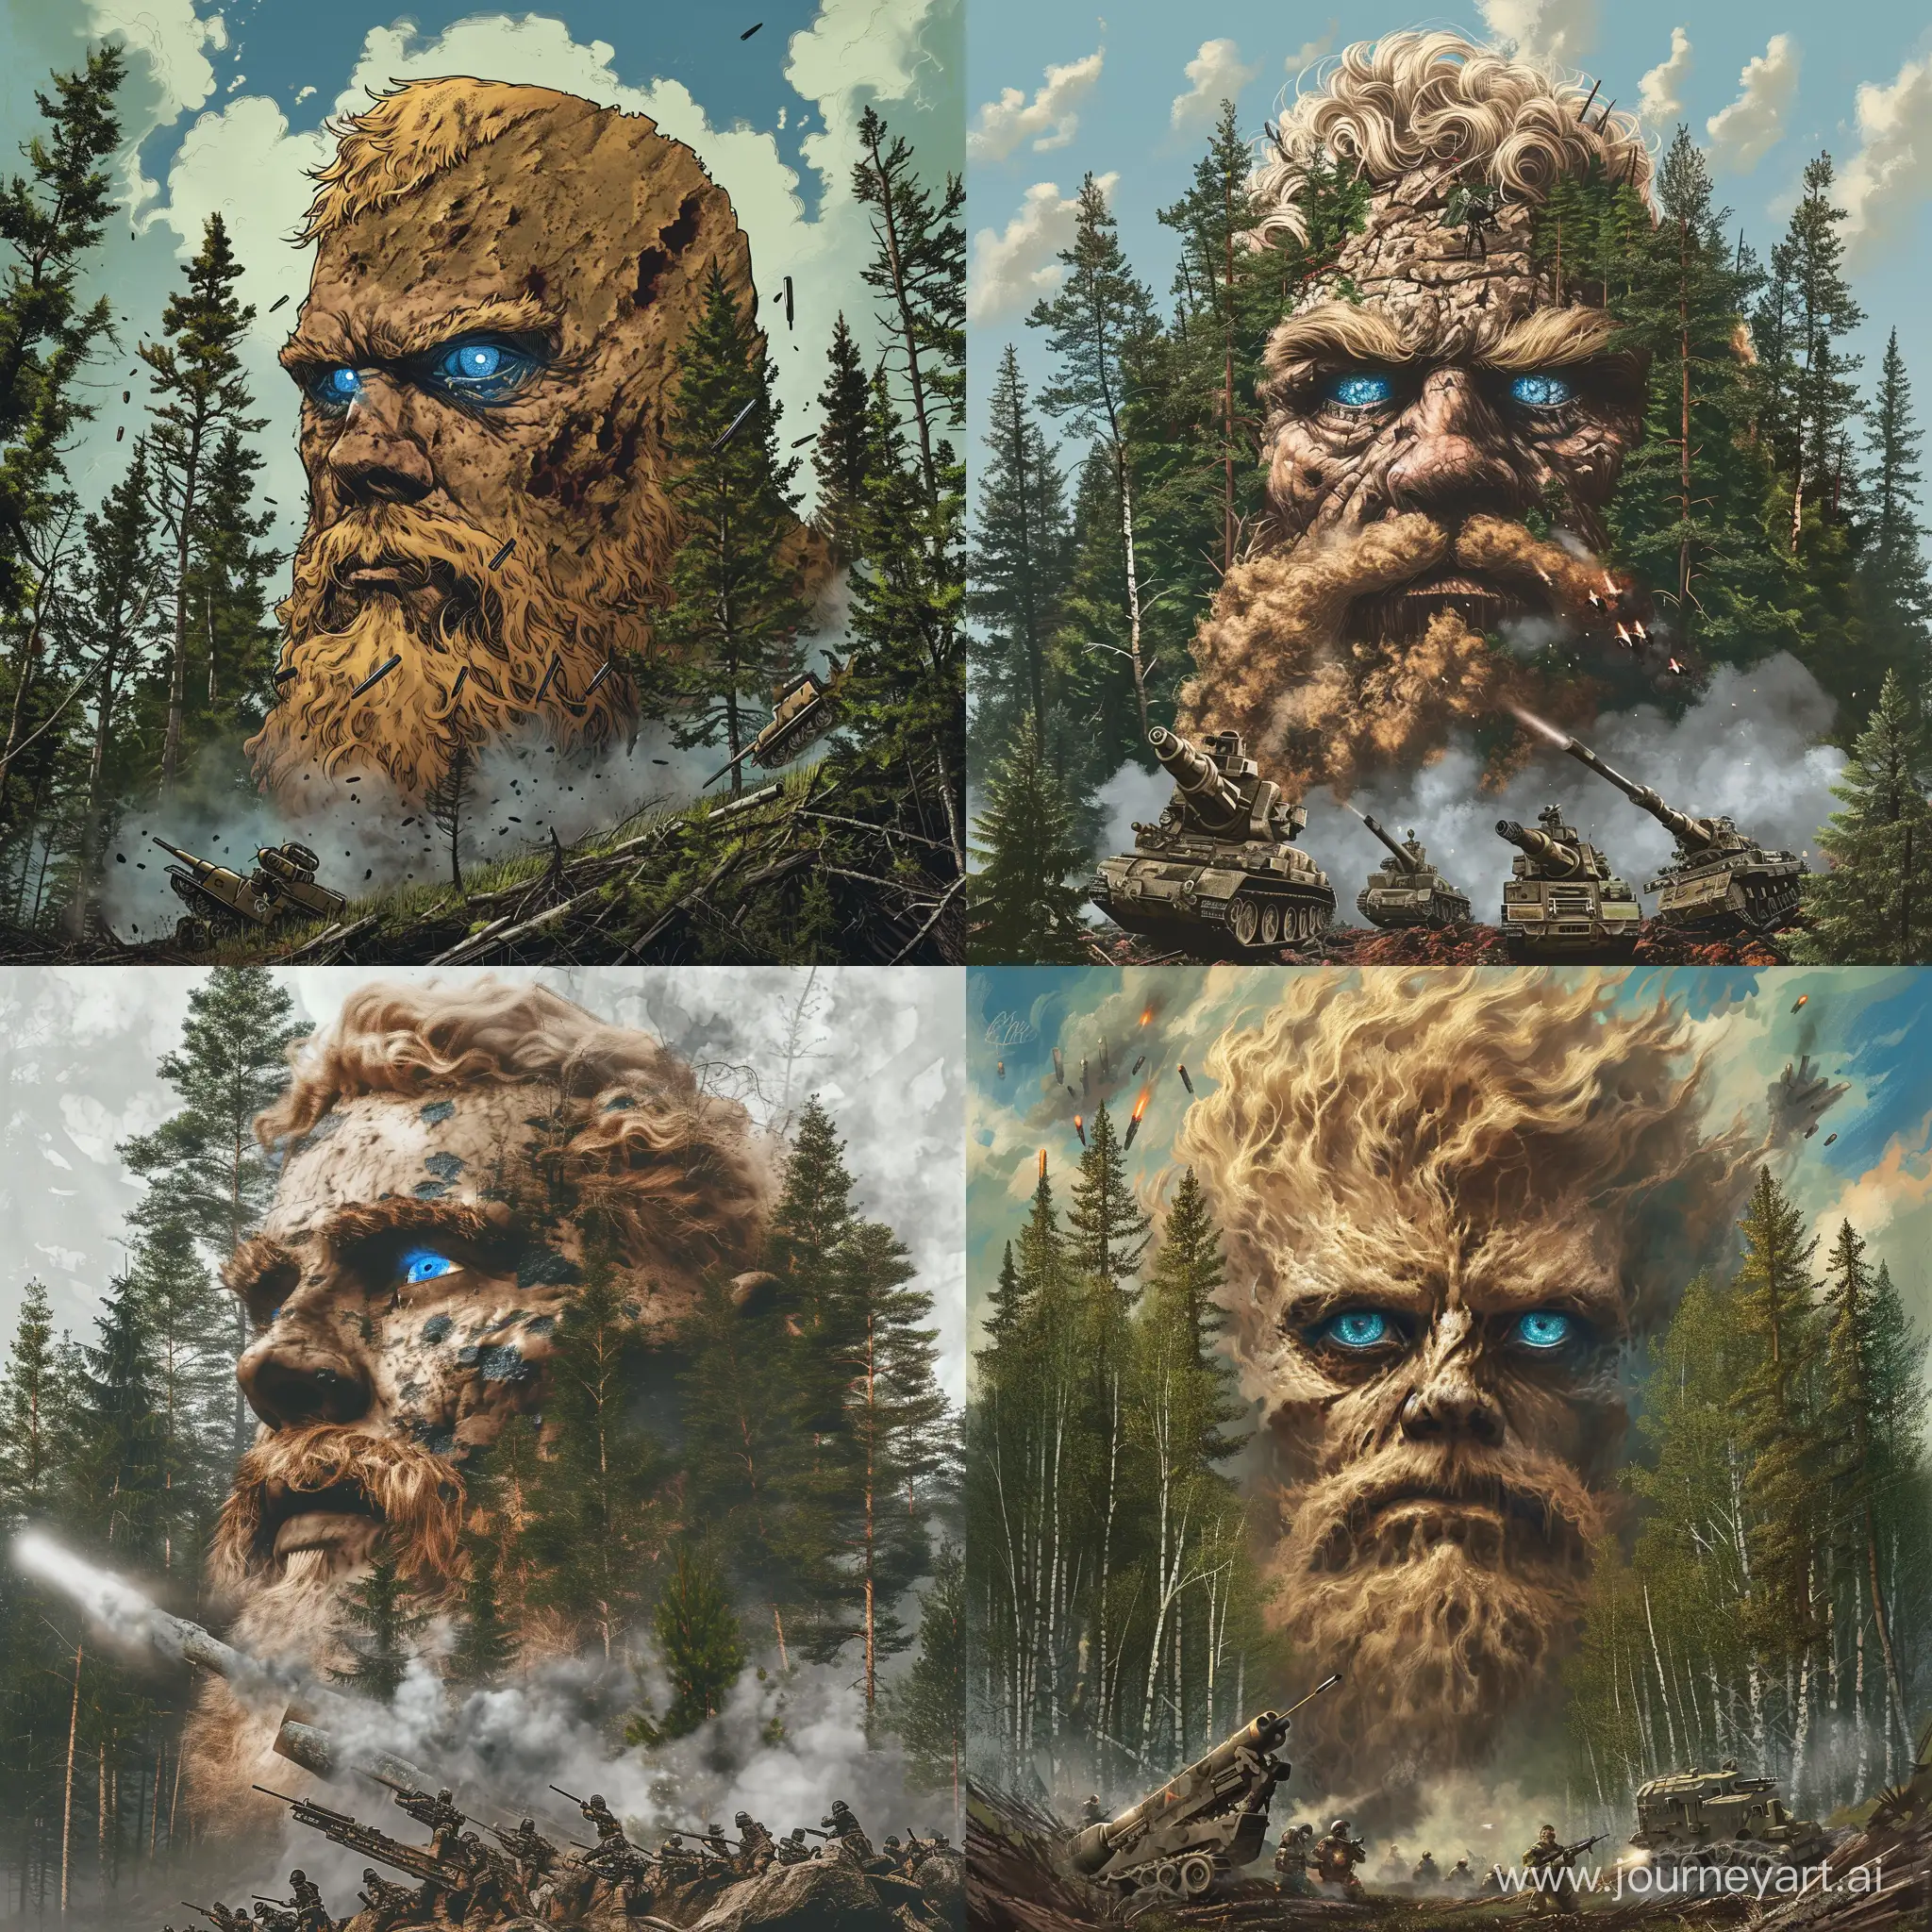 Mountain of man (human Slavic head with trees in background, he with powerful blue eyes, beard and blond hair) More Slavic appearance, birches and spruce in background. A man of Slavic appearance (mountain) blows away enemy mortars, howitzers, infantry